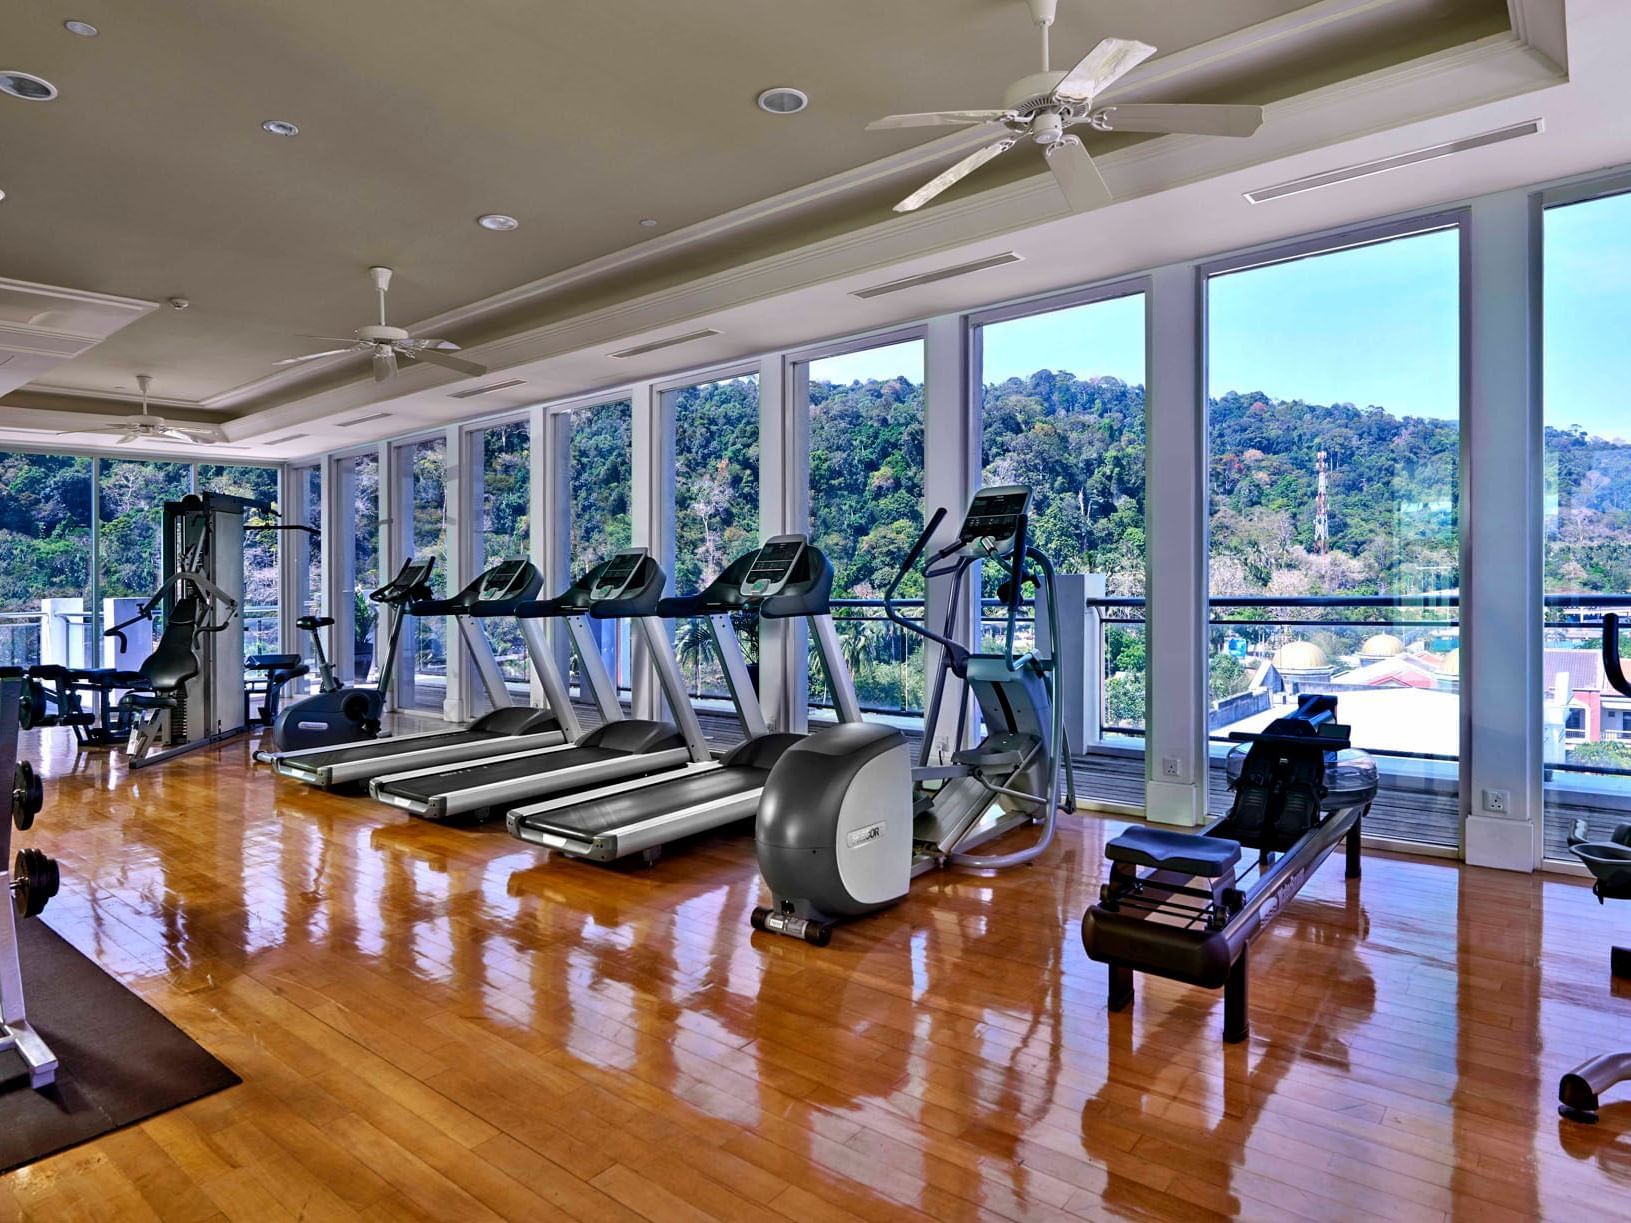 A view of Fitness Center at The Danna Langkawi Hotel